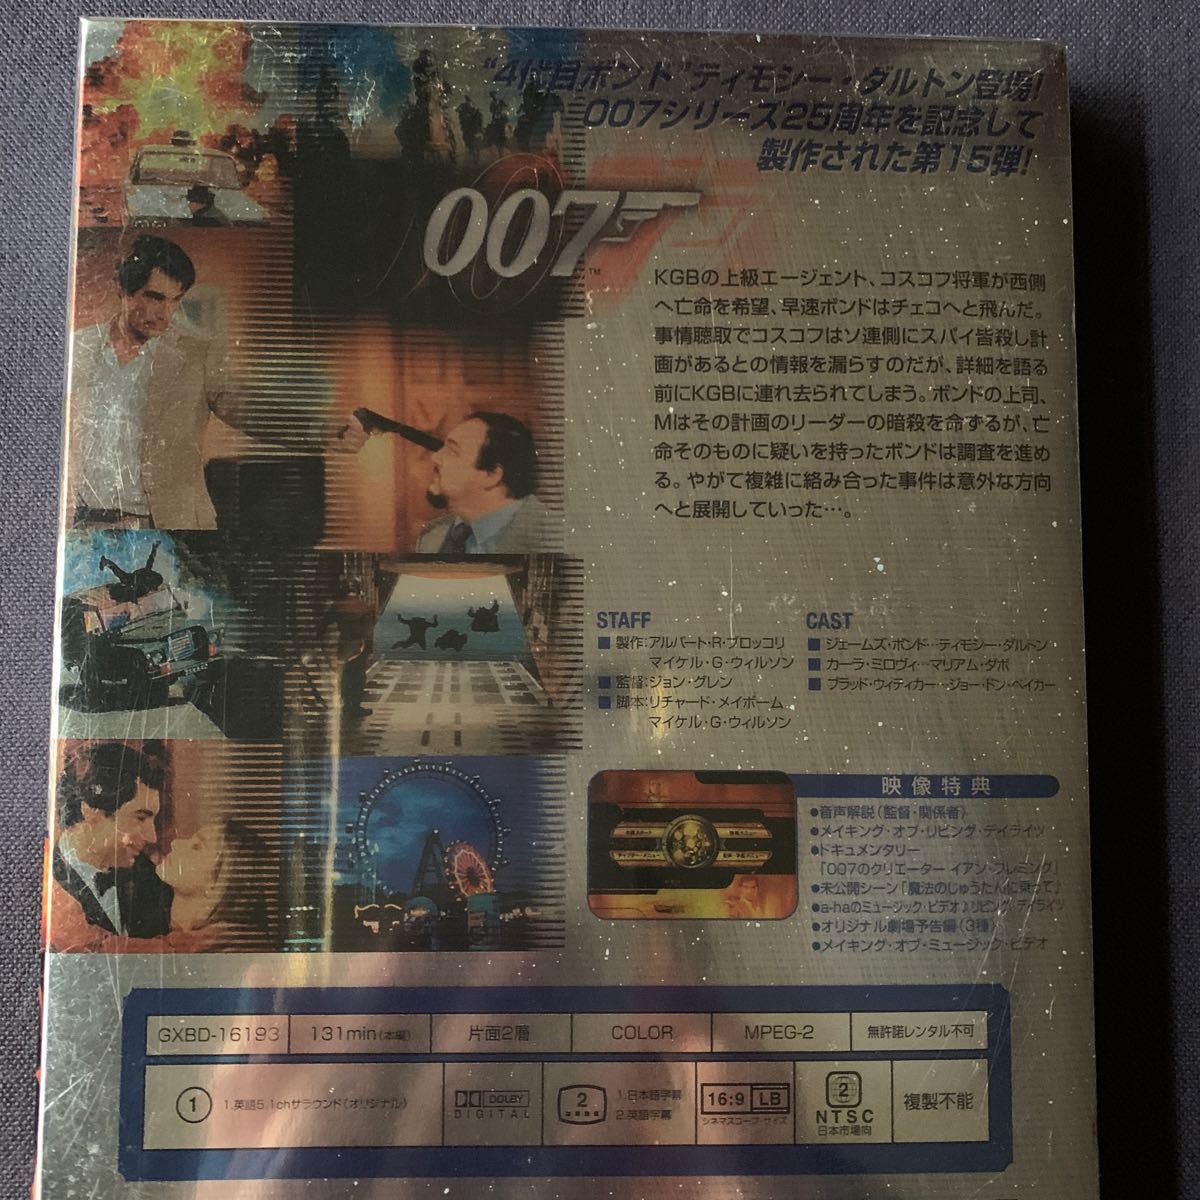 [ unopened ]DVD[ living *tei*lai two special compilation -]40 anniversary commemoration limited time 007 series no. 15.timosi-* Dulton Mali am*dabo